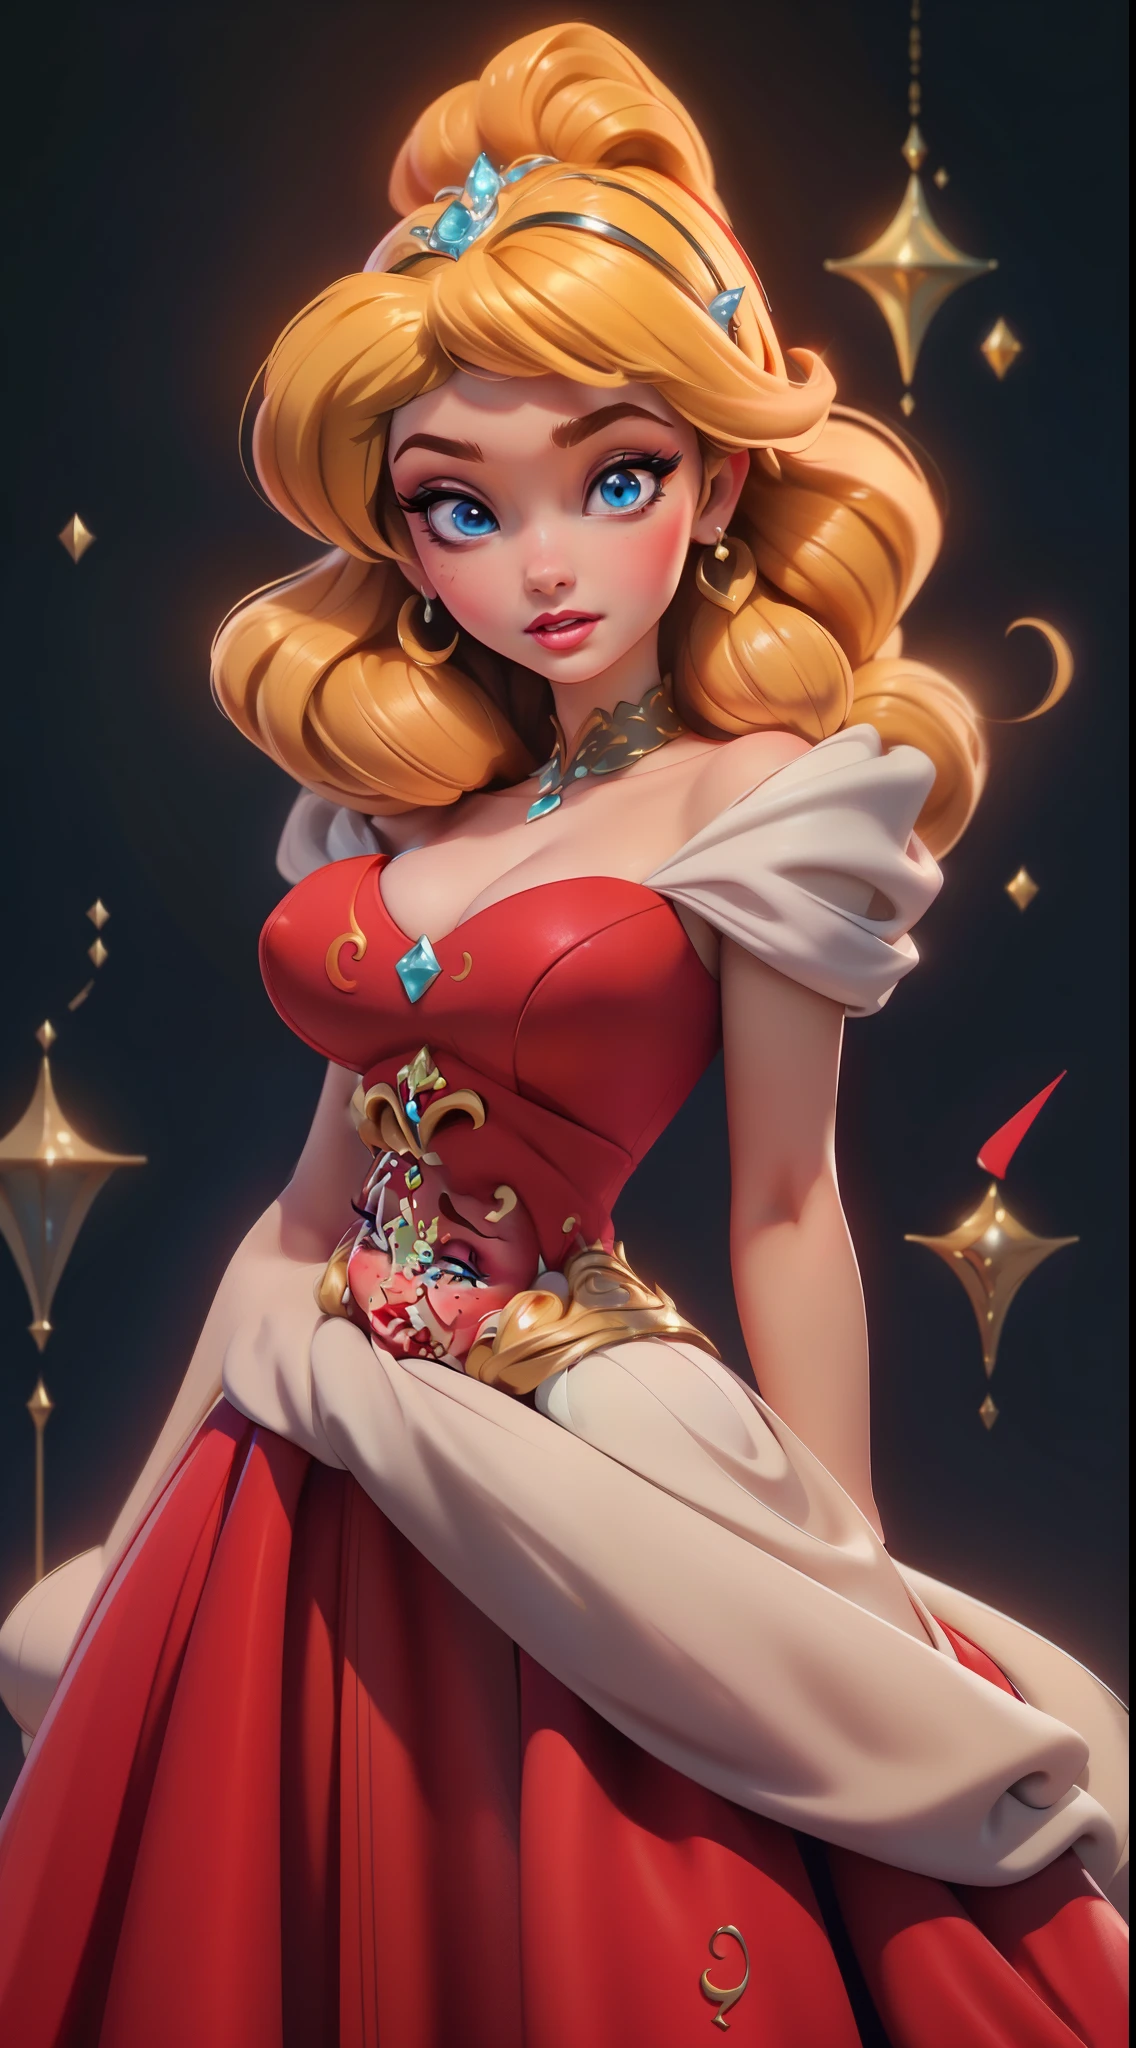 princess that has Pauline's body, heavy makeup on her eyes and lips, and Rosalinas blonde hair covering one eye, melting, 1girl, wearing red elegant ball gown, red gown, Beautiful, character, Woman, female, (master part:1.2), (best qualityer:1.2), (standing alone:1.2), ((struggling pose)), ((field of battle)), cinemactic, perfects eyes, perfect  skin, perfect lighting, sorrido, Lumiere, Farbe, texturized skin, detail, Beauthfull, wonder wonder wonder wonder wonder wonder wonder wonder wonder wonder wonder wonder wonder wonder wonder wonder wonder wonder wonder wonder wonder wonder wonder wonder wonder wonder wonder wonder wonder wonder wonder wonder, ultra detali, face perfect